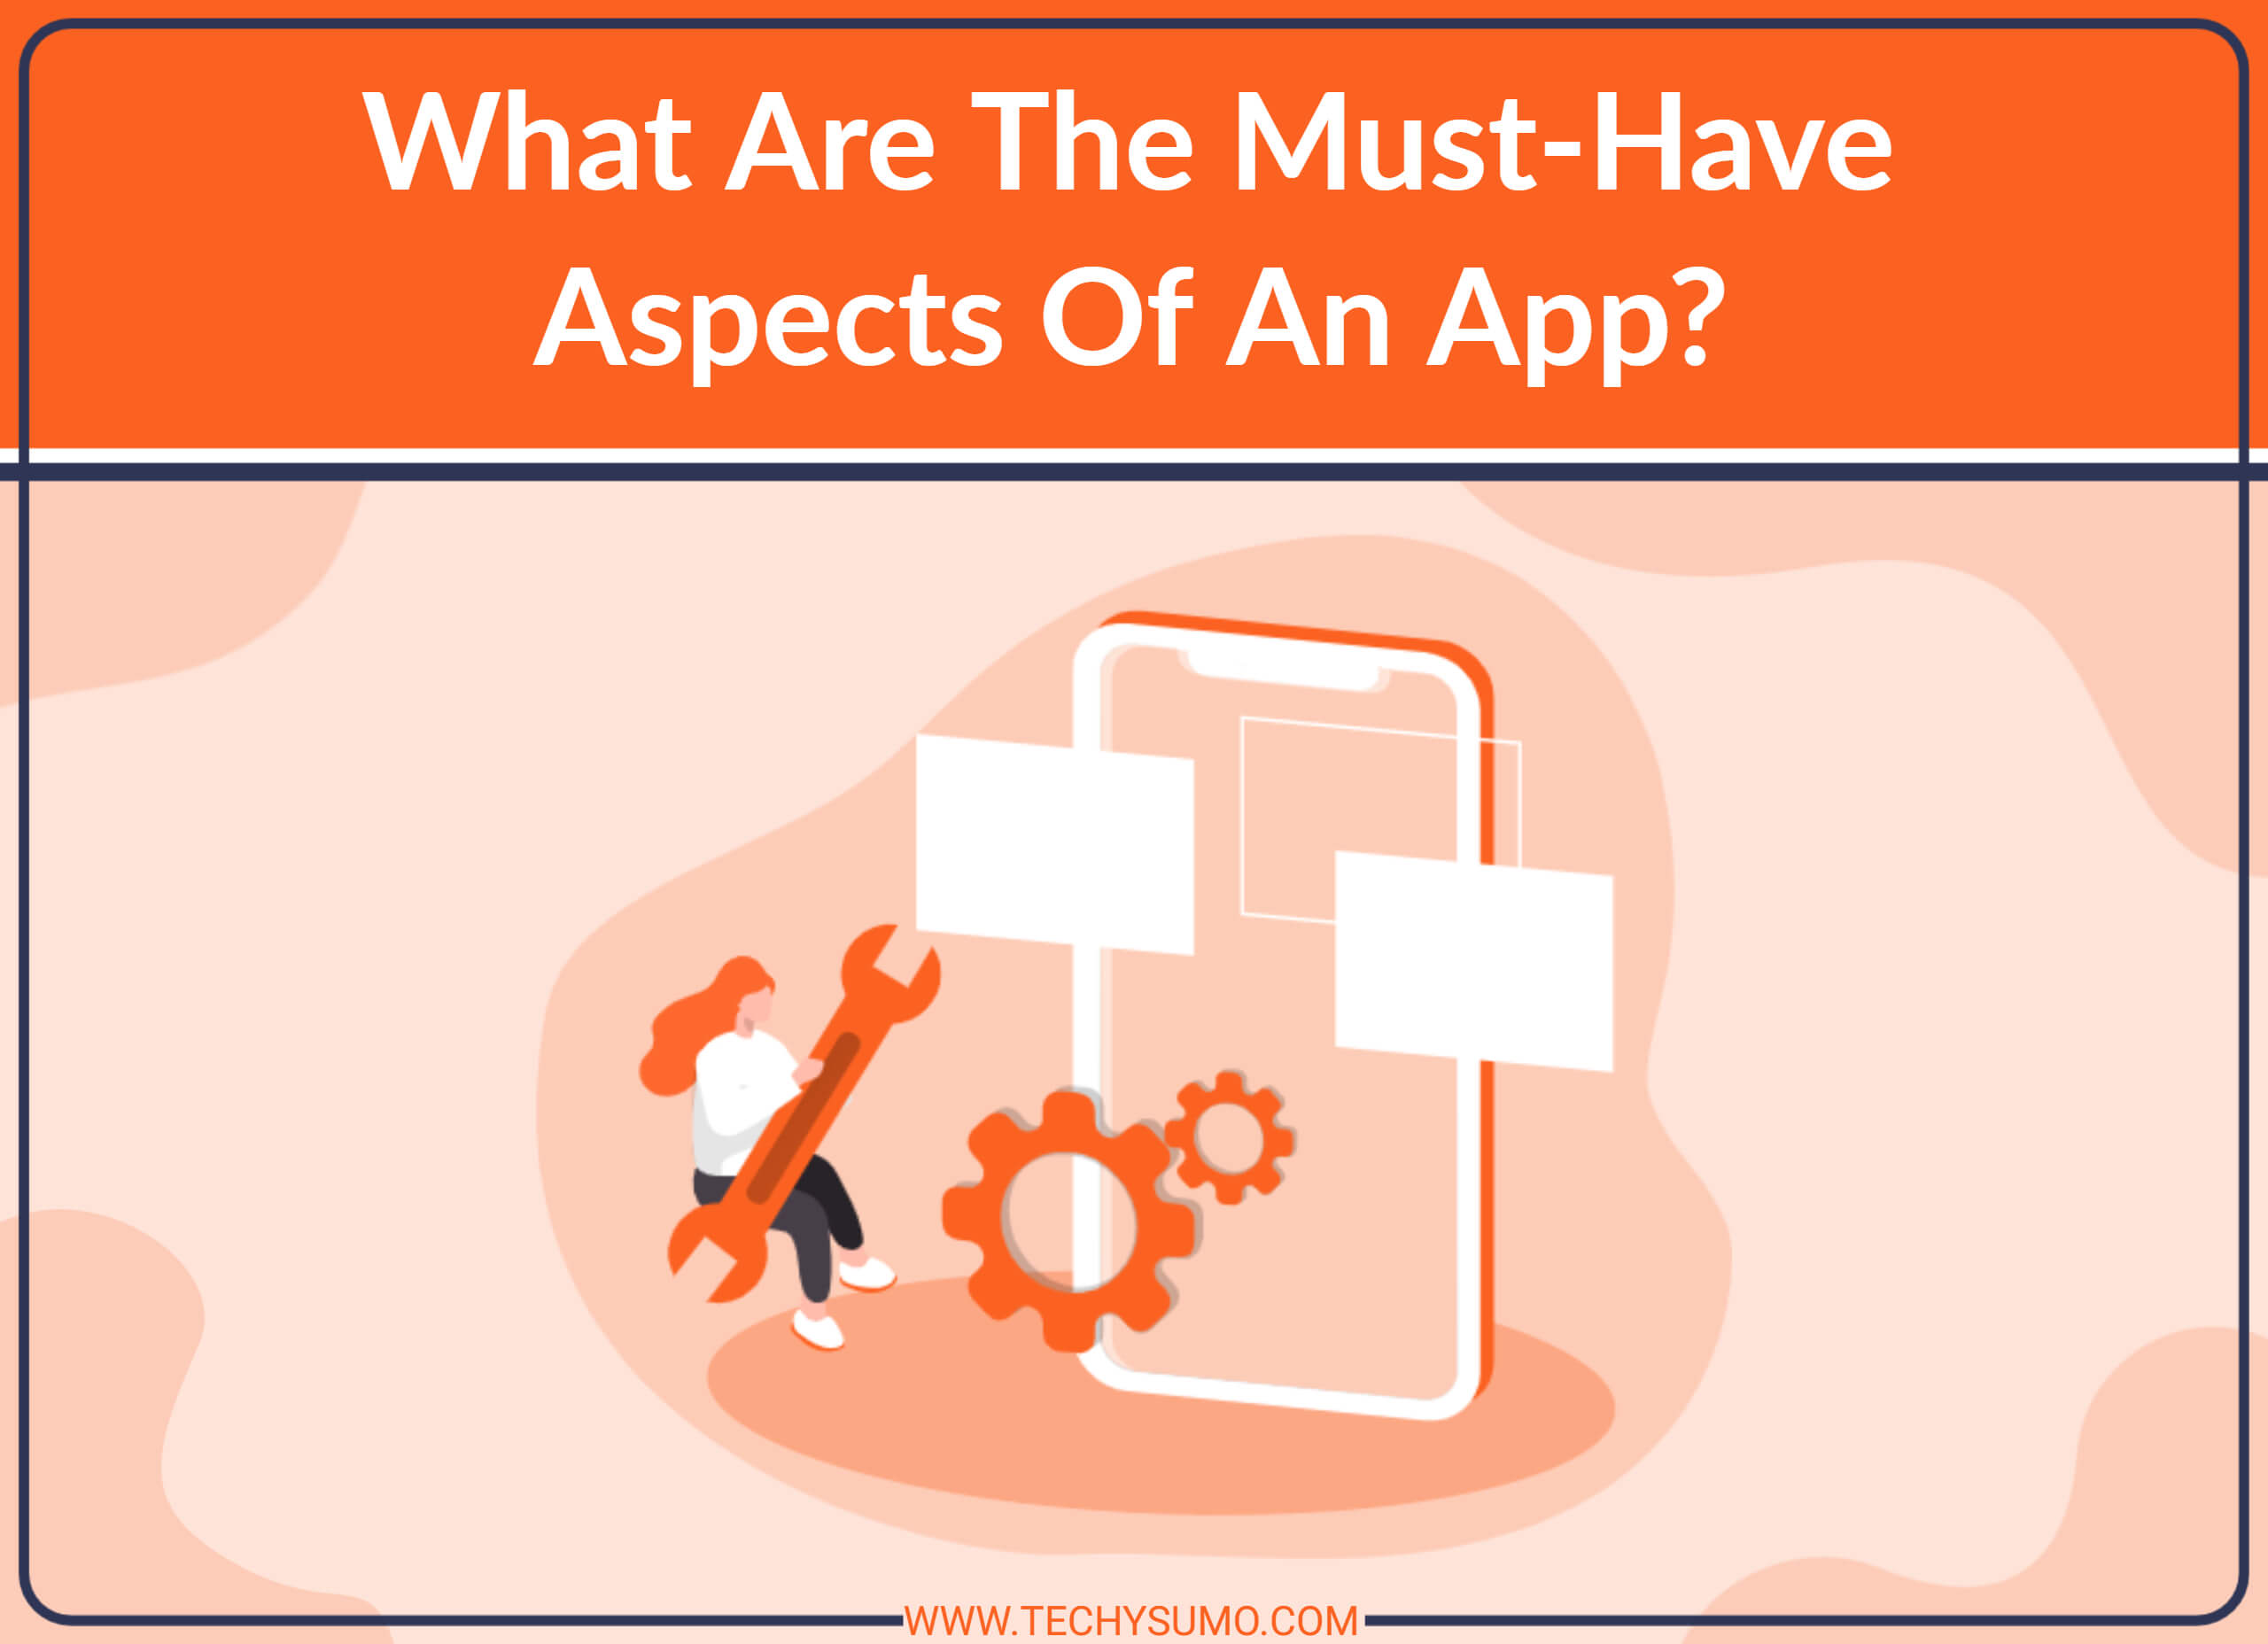 What are the must-have aspects of an app?